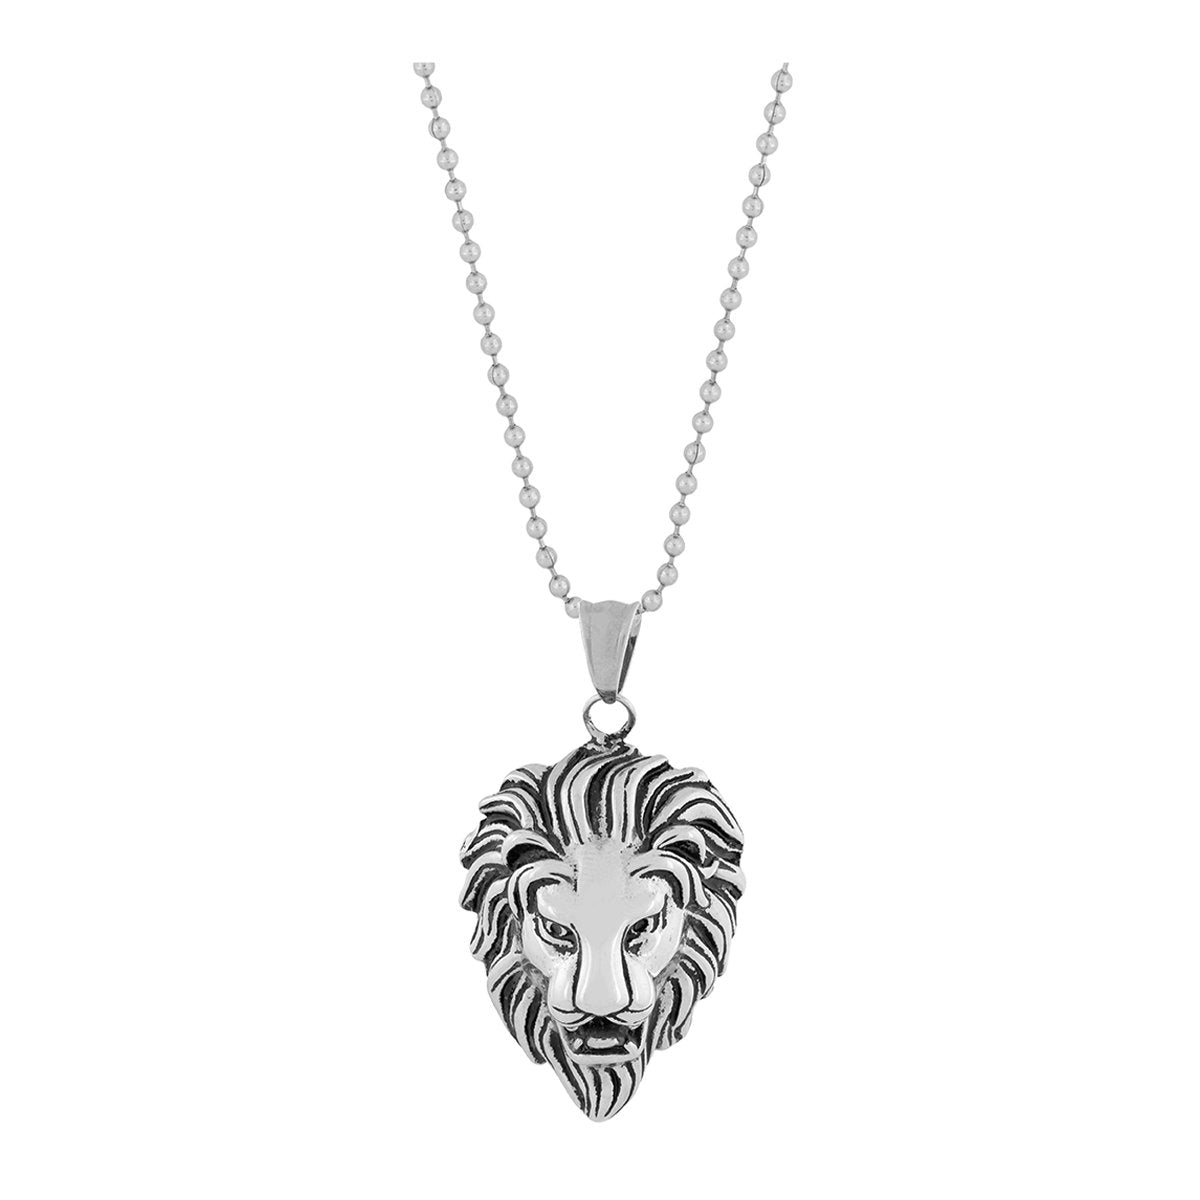 Lion Dragon Silver Stainless Steel Gift Pendant Chain Necklace Men